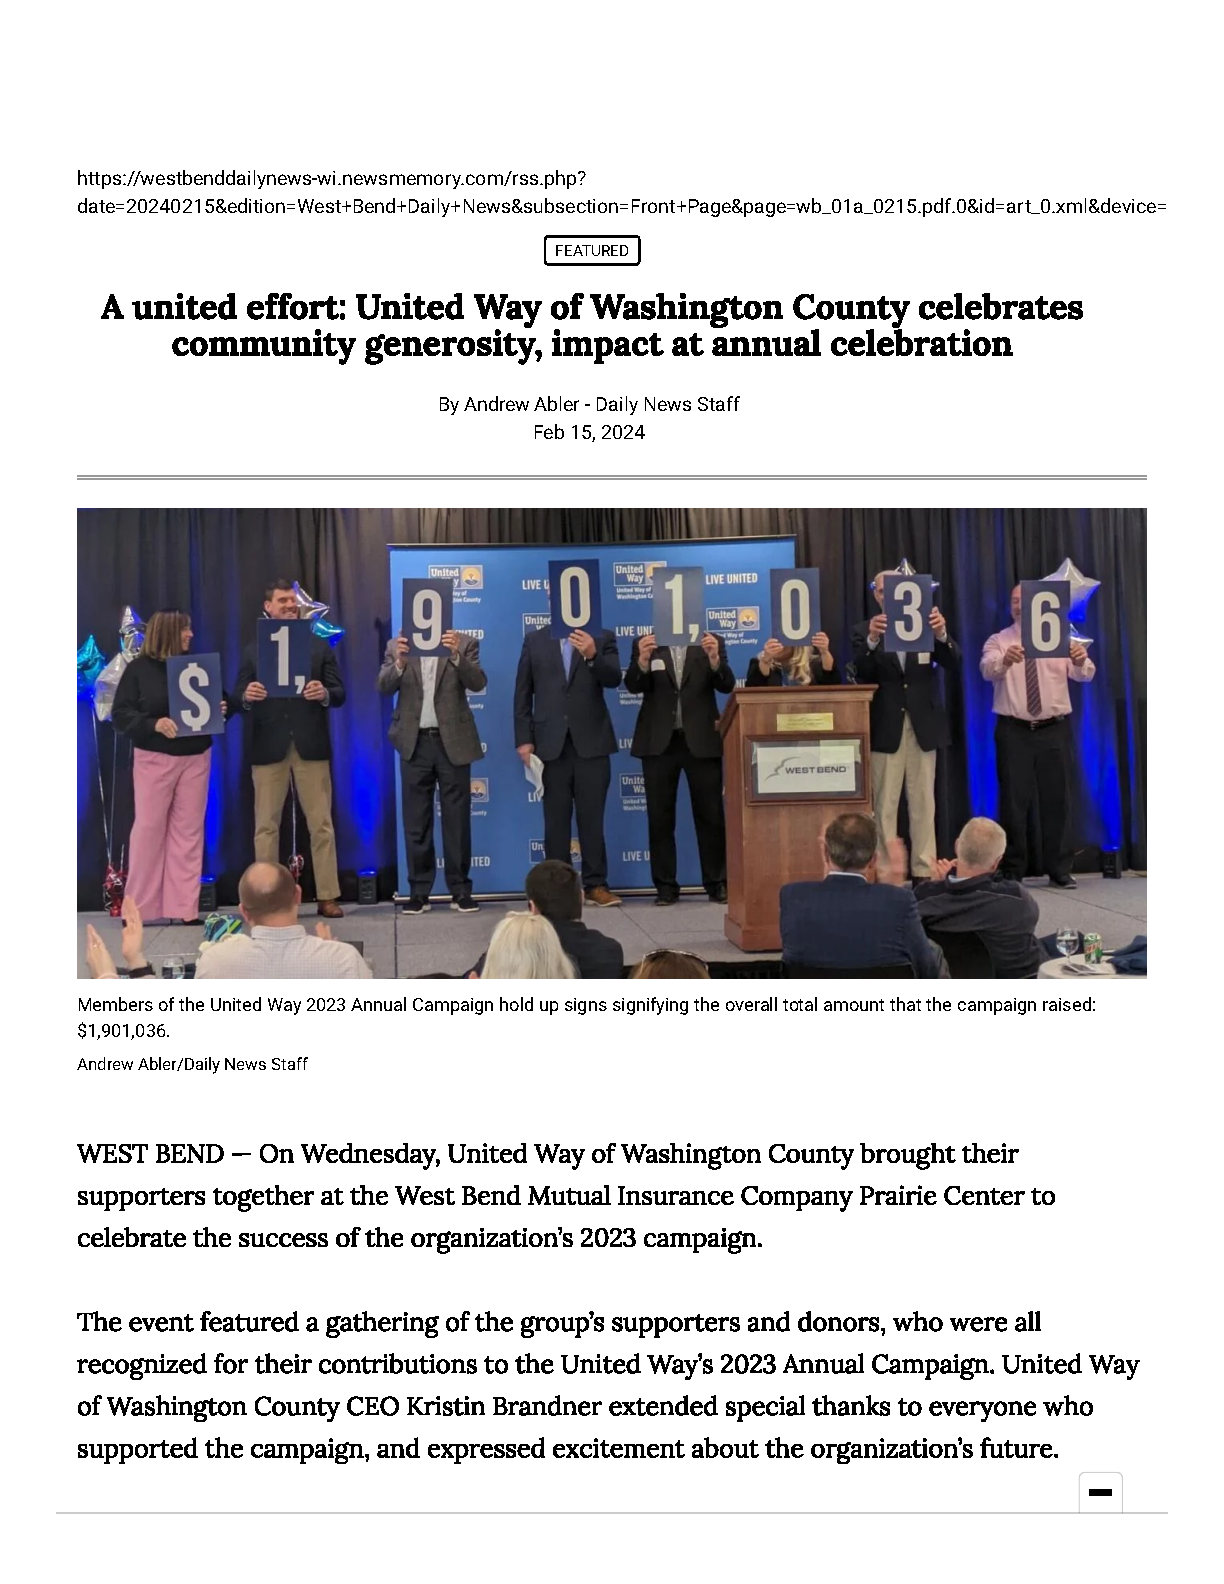 Page one of an article from the Daily News describing the 2023 United Way campaign success.